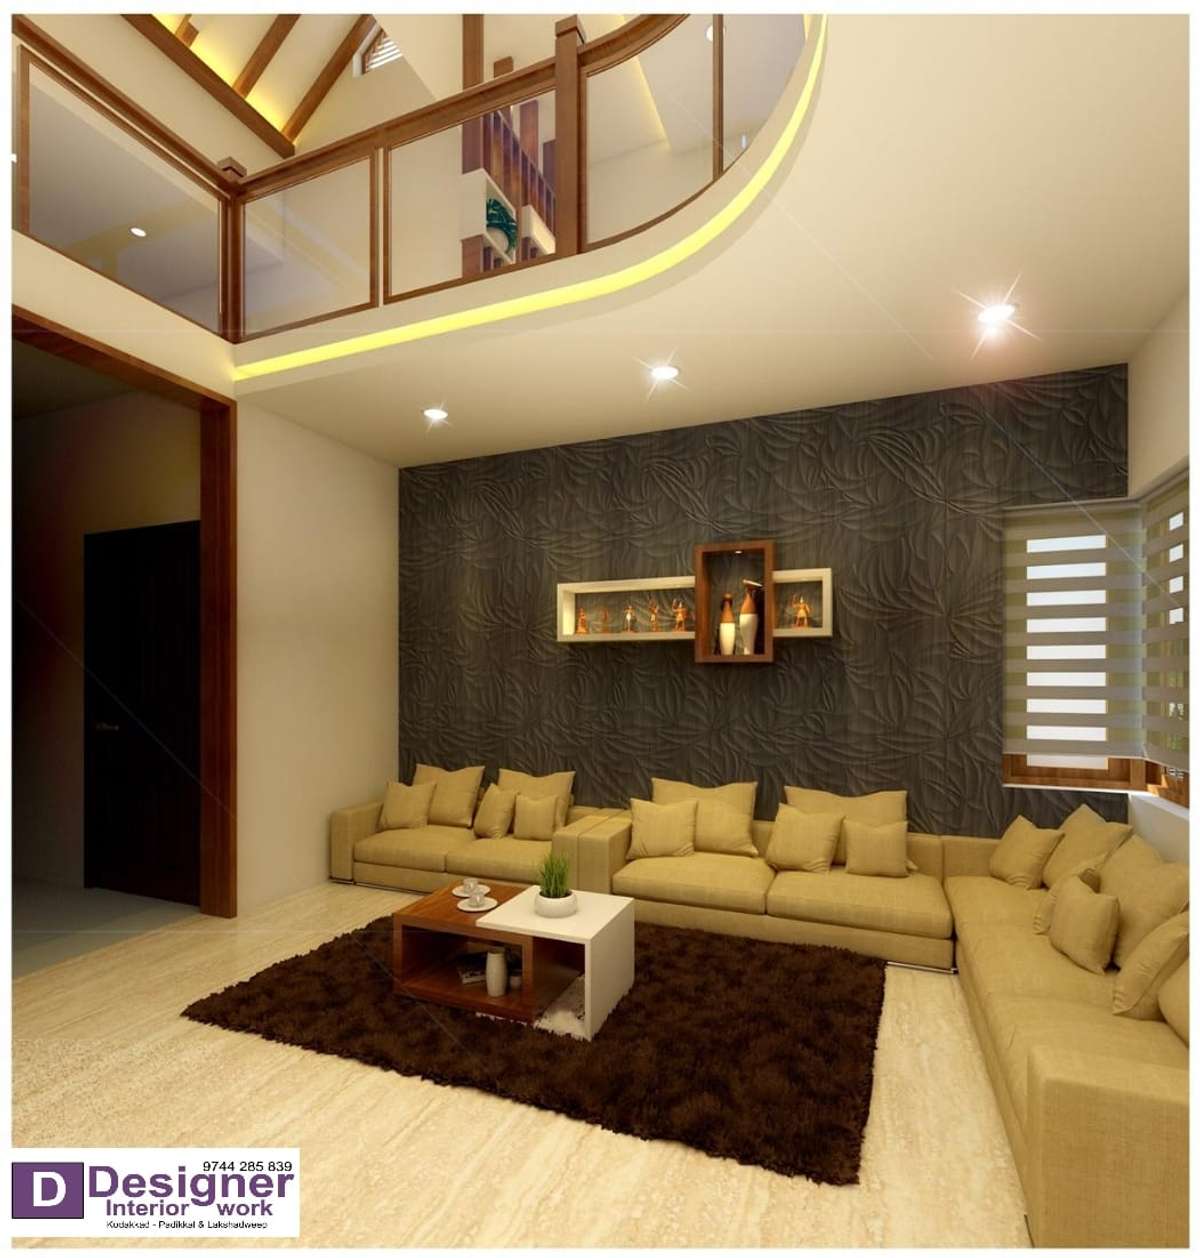 Furniture, Lighting, Living, Table Designs by Interior Designer designer interior 9744285839, Malappuram | Kolo